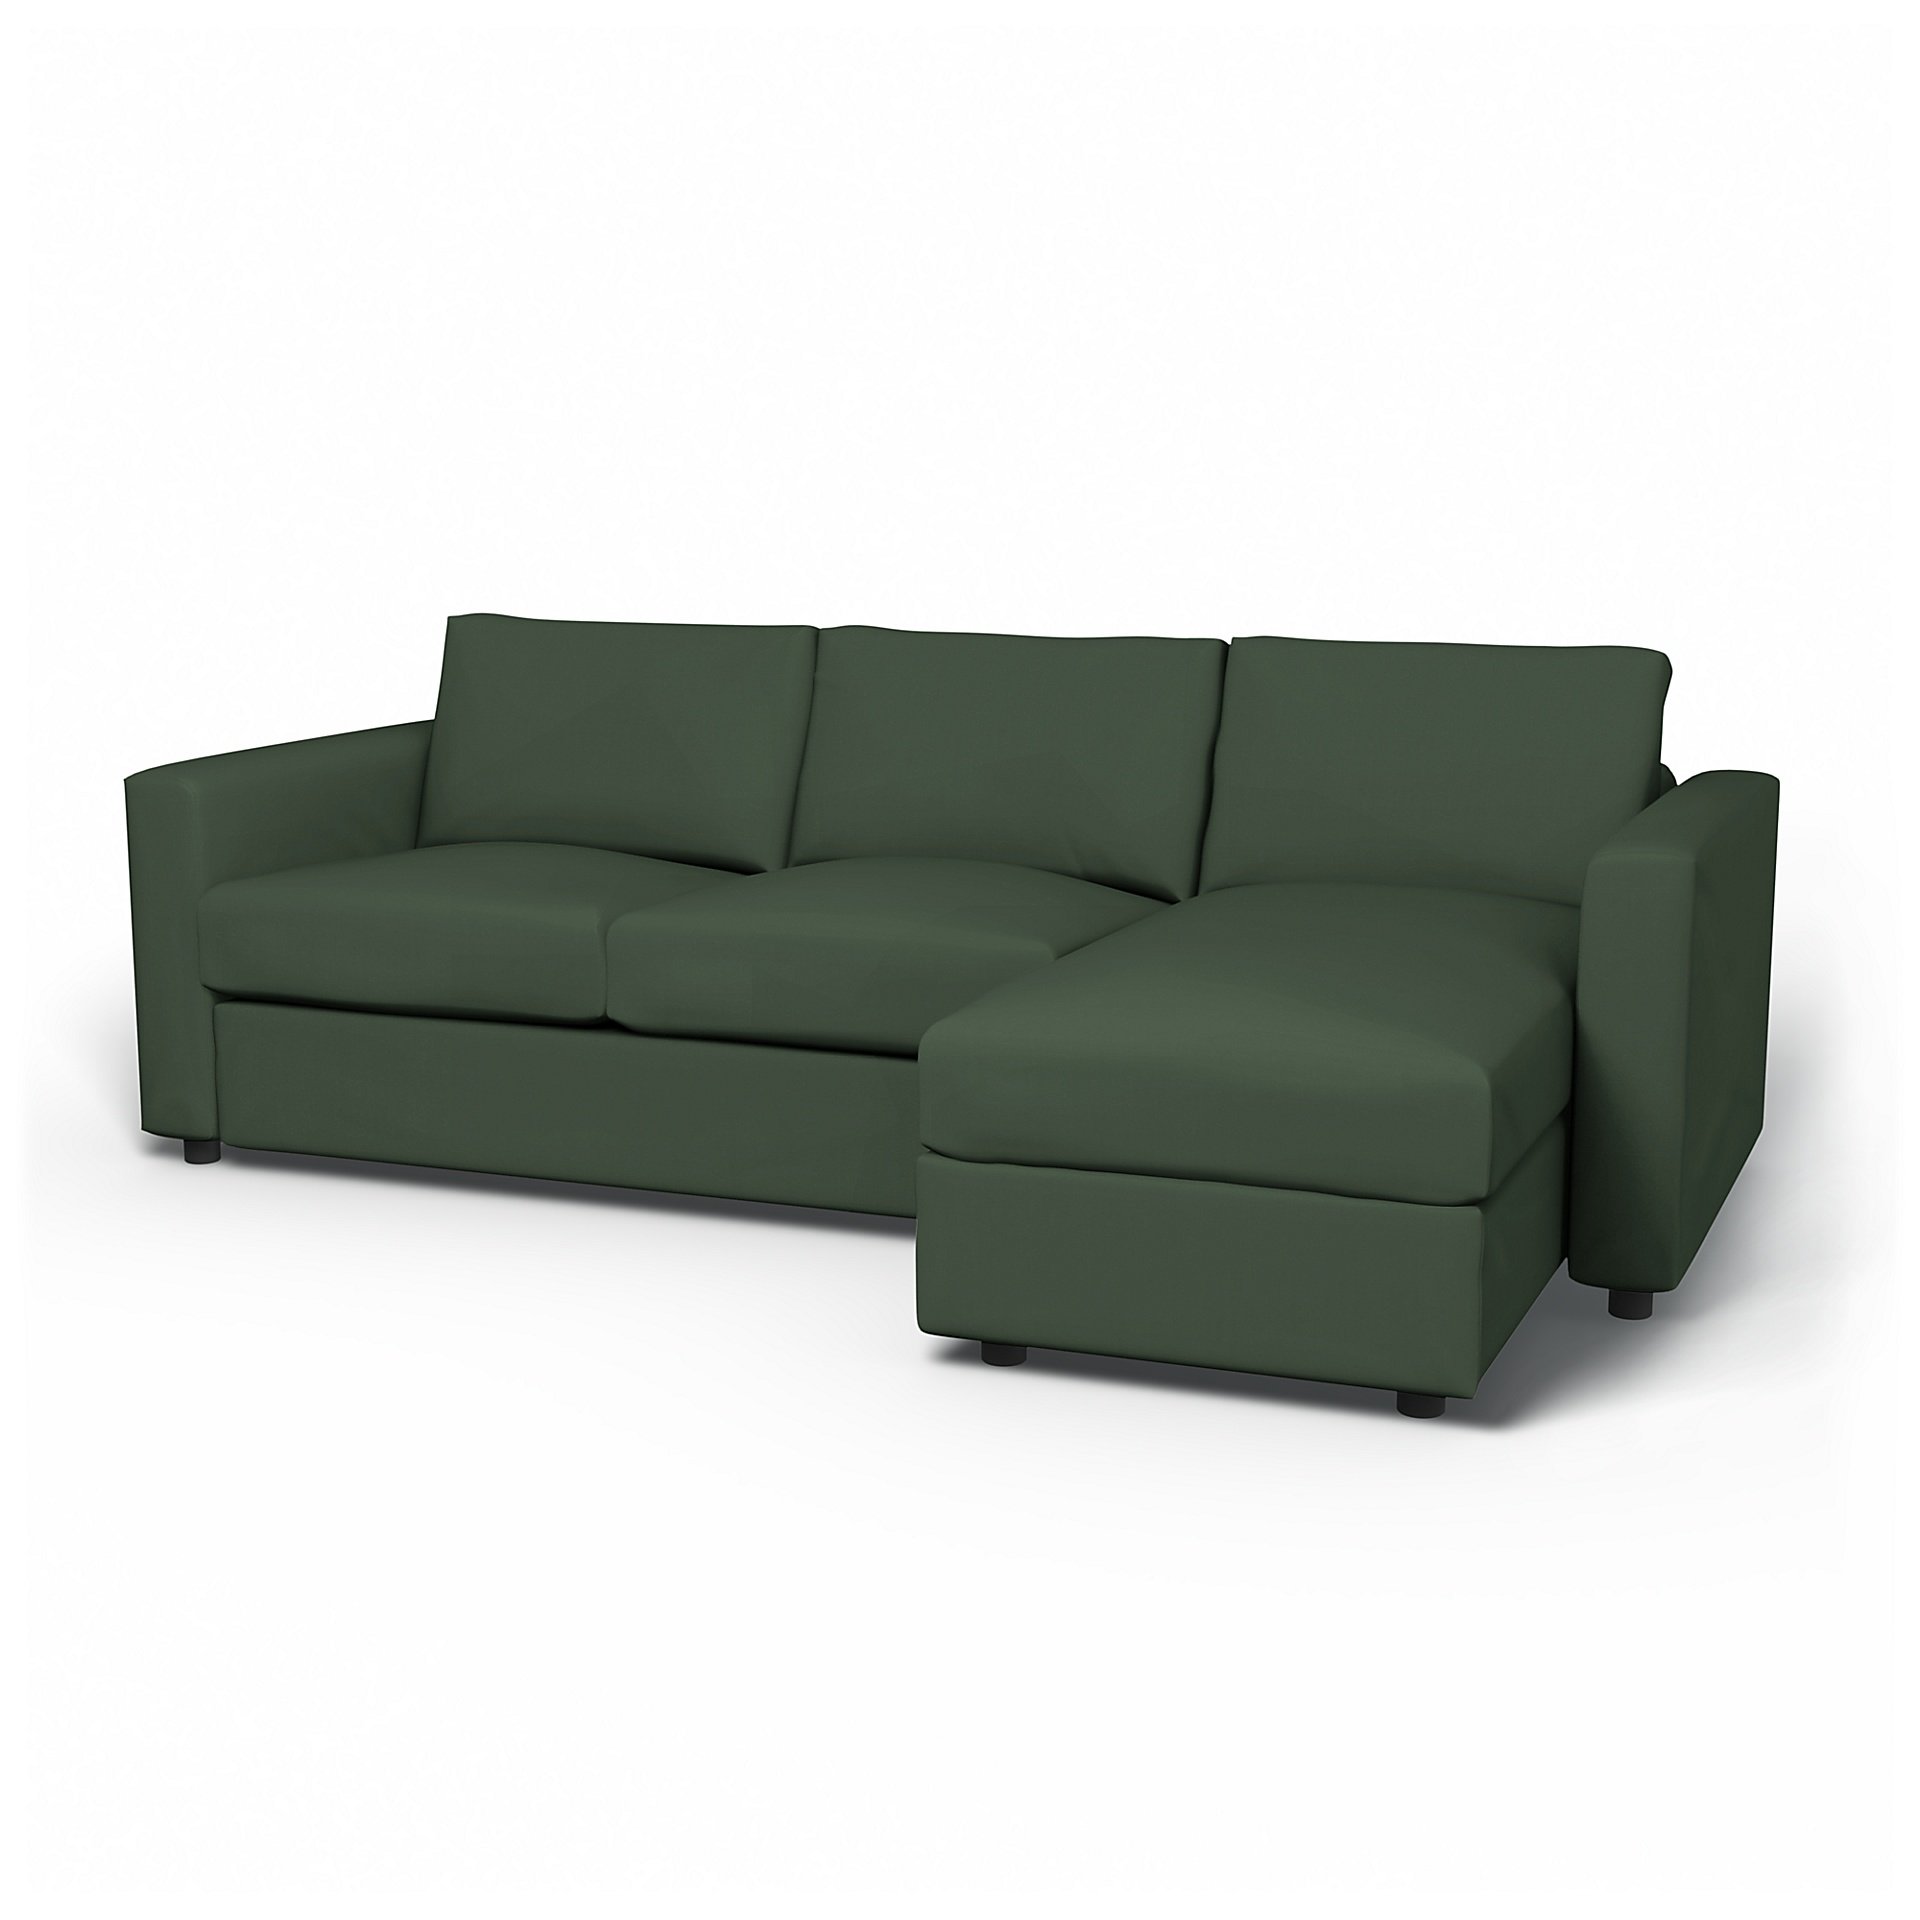 IKEA - Vimle 2 Seater Sofa with Chaise Cover, Thyme, Cotton - Bemz